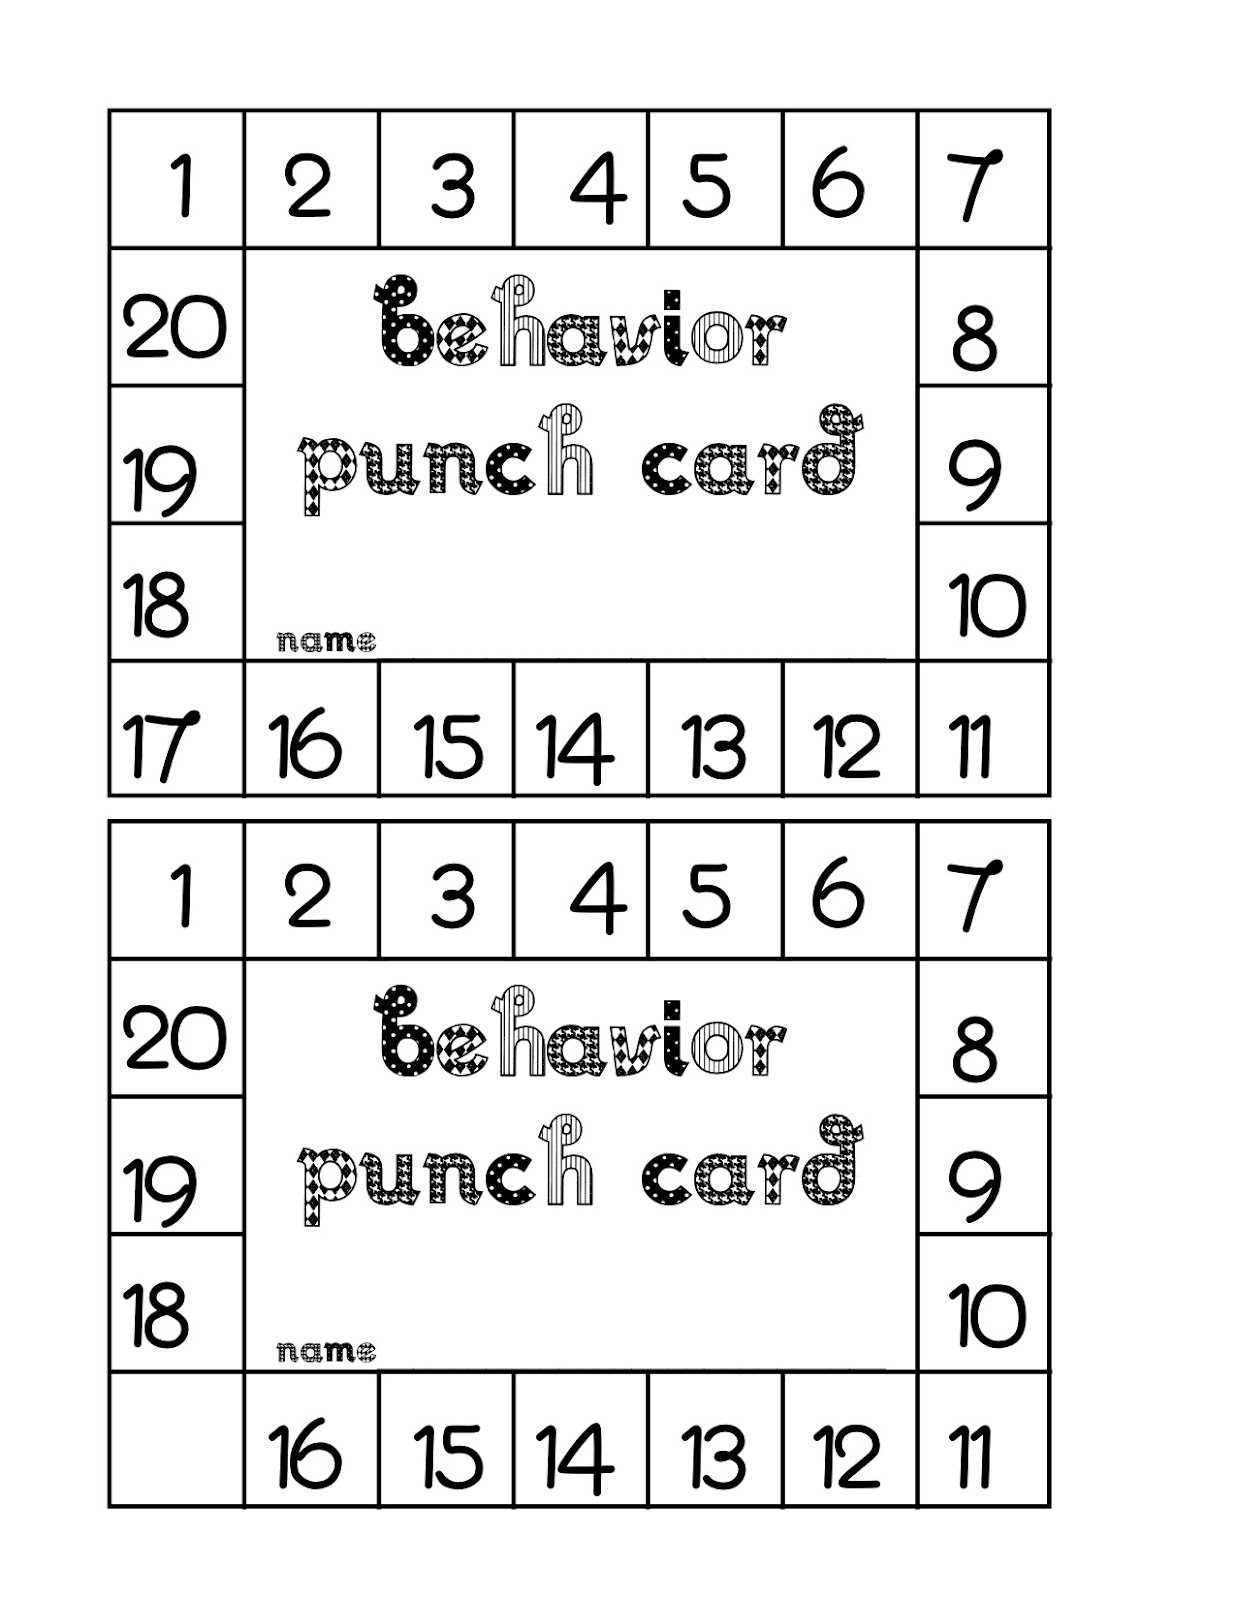 Punch Card Template Free ] - Free Printable Punch Card For Free Printable Punch Card Template